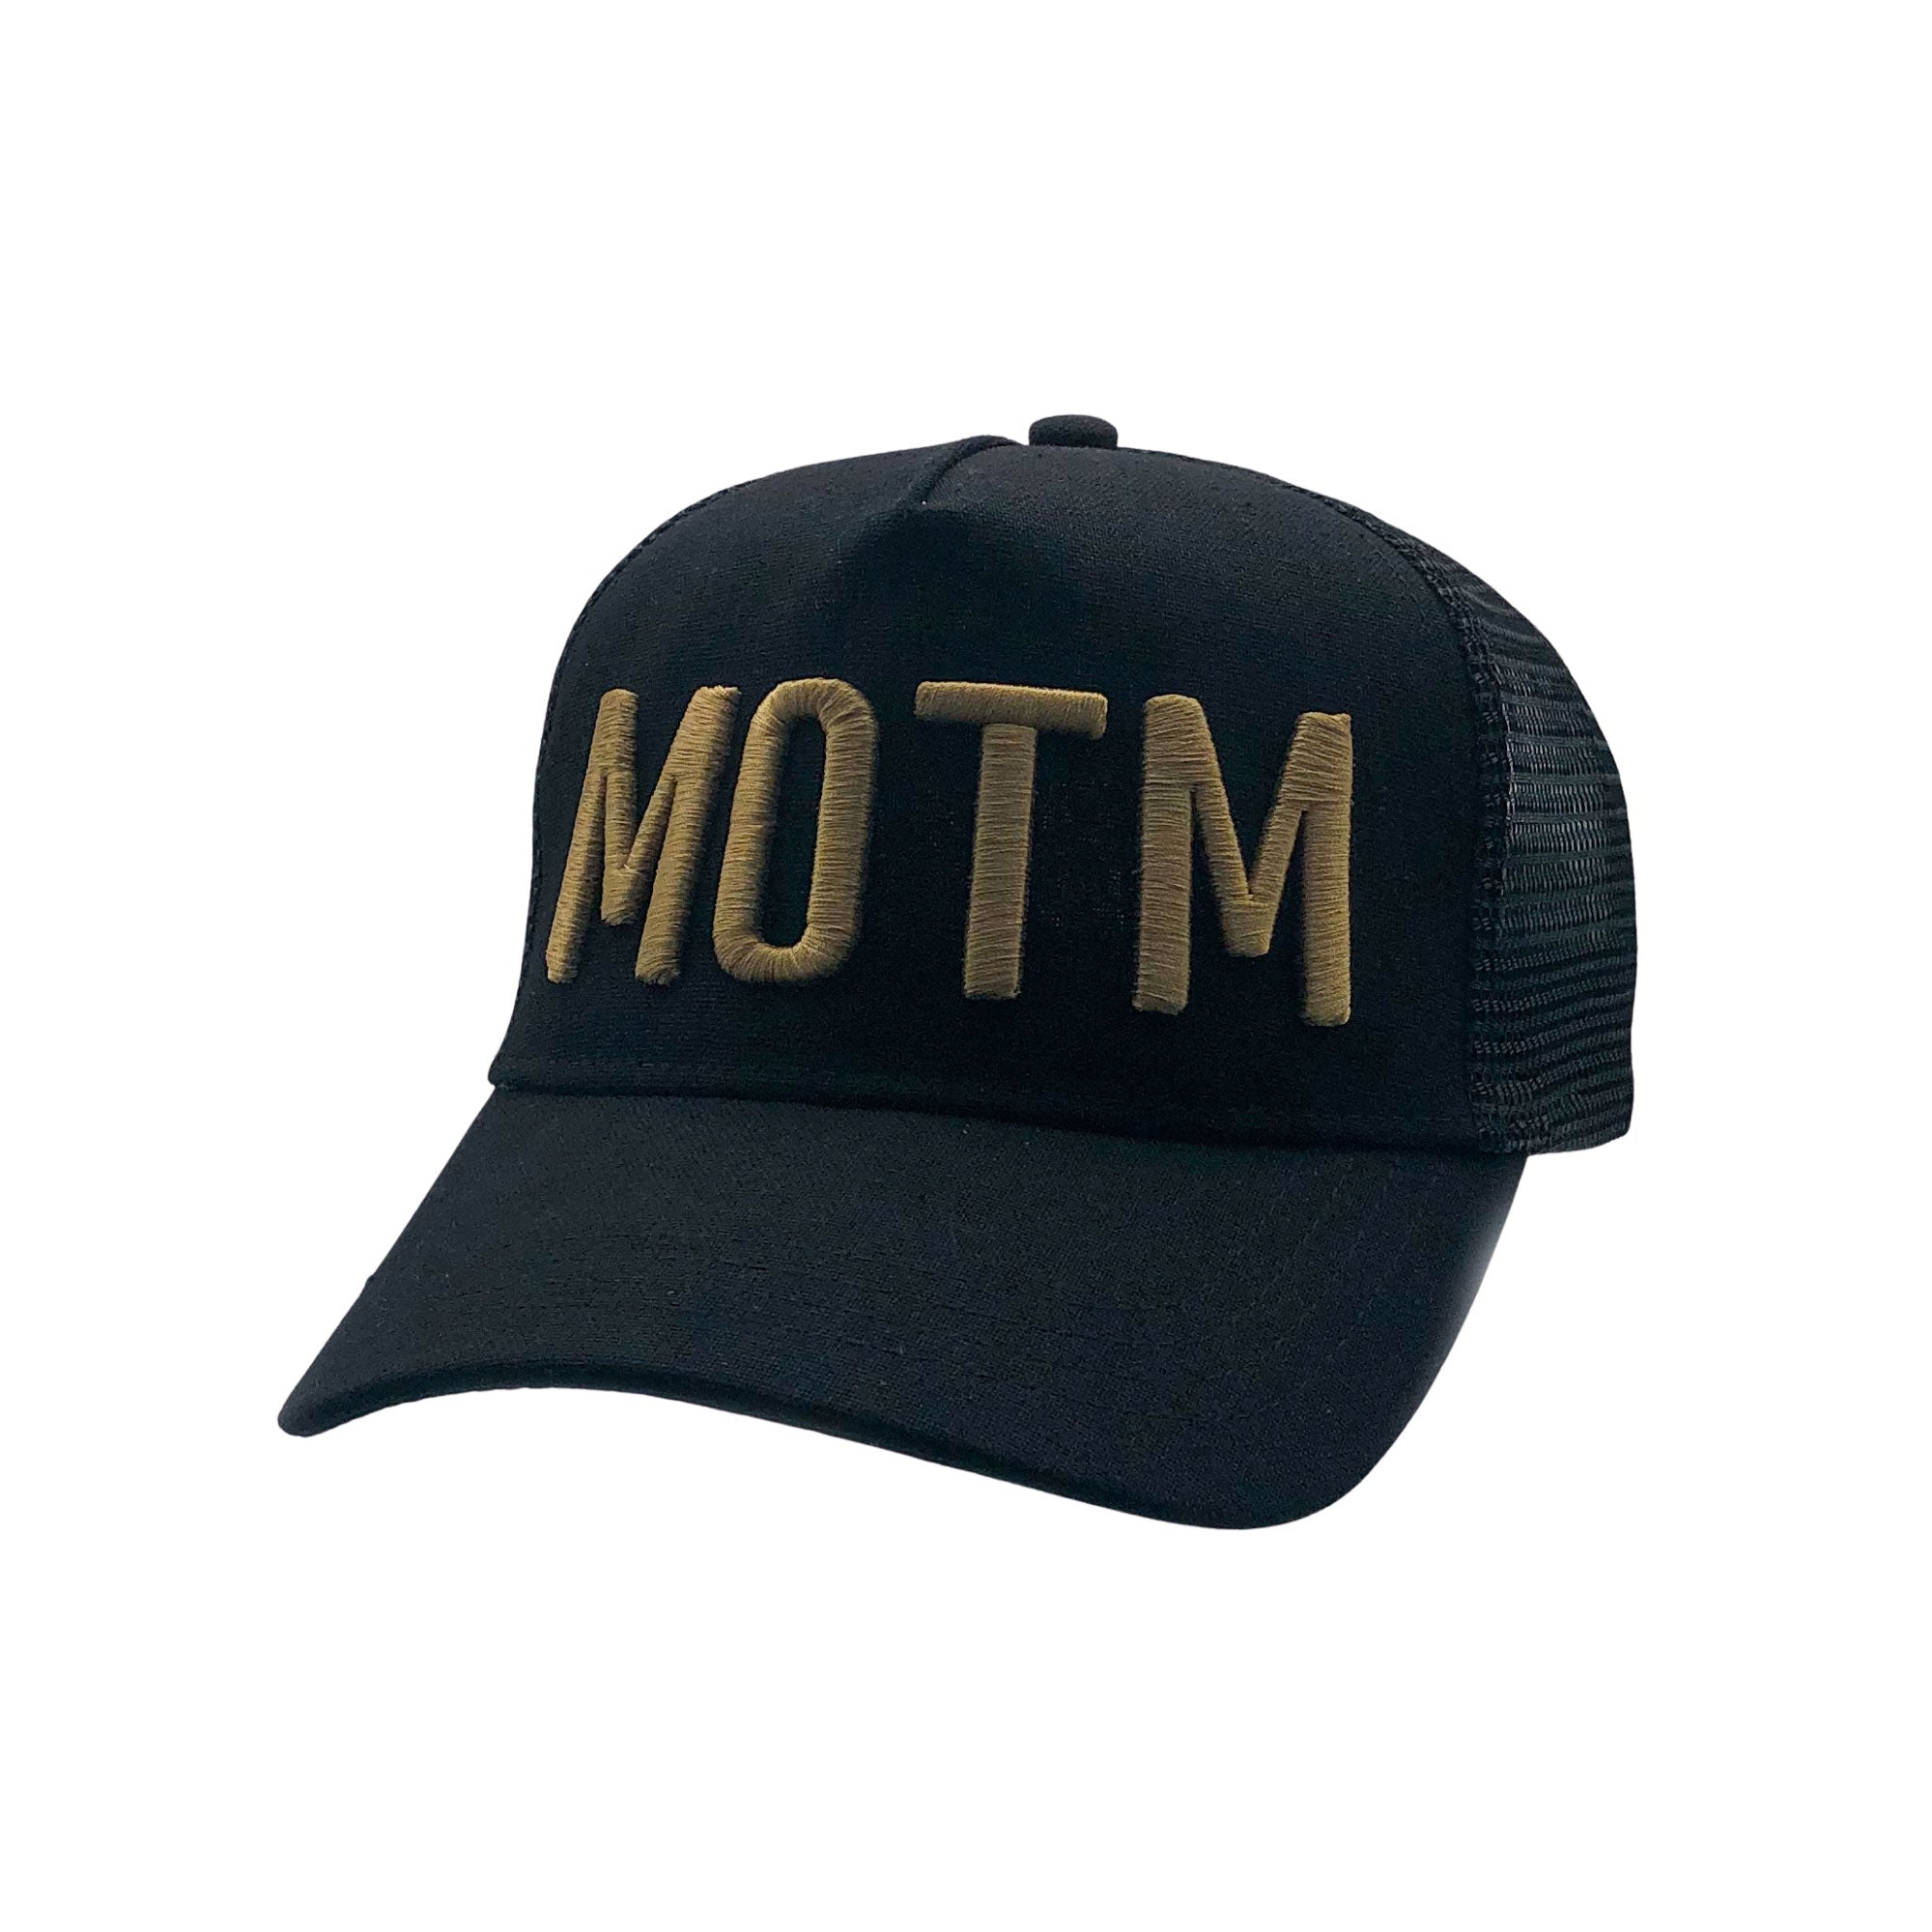 MAN OF THE MATCH® Official Cap - MOTM ICON 3D Embroidered Gold on Black - Premium Linen